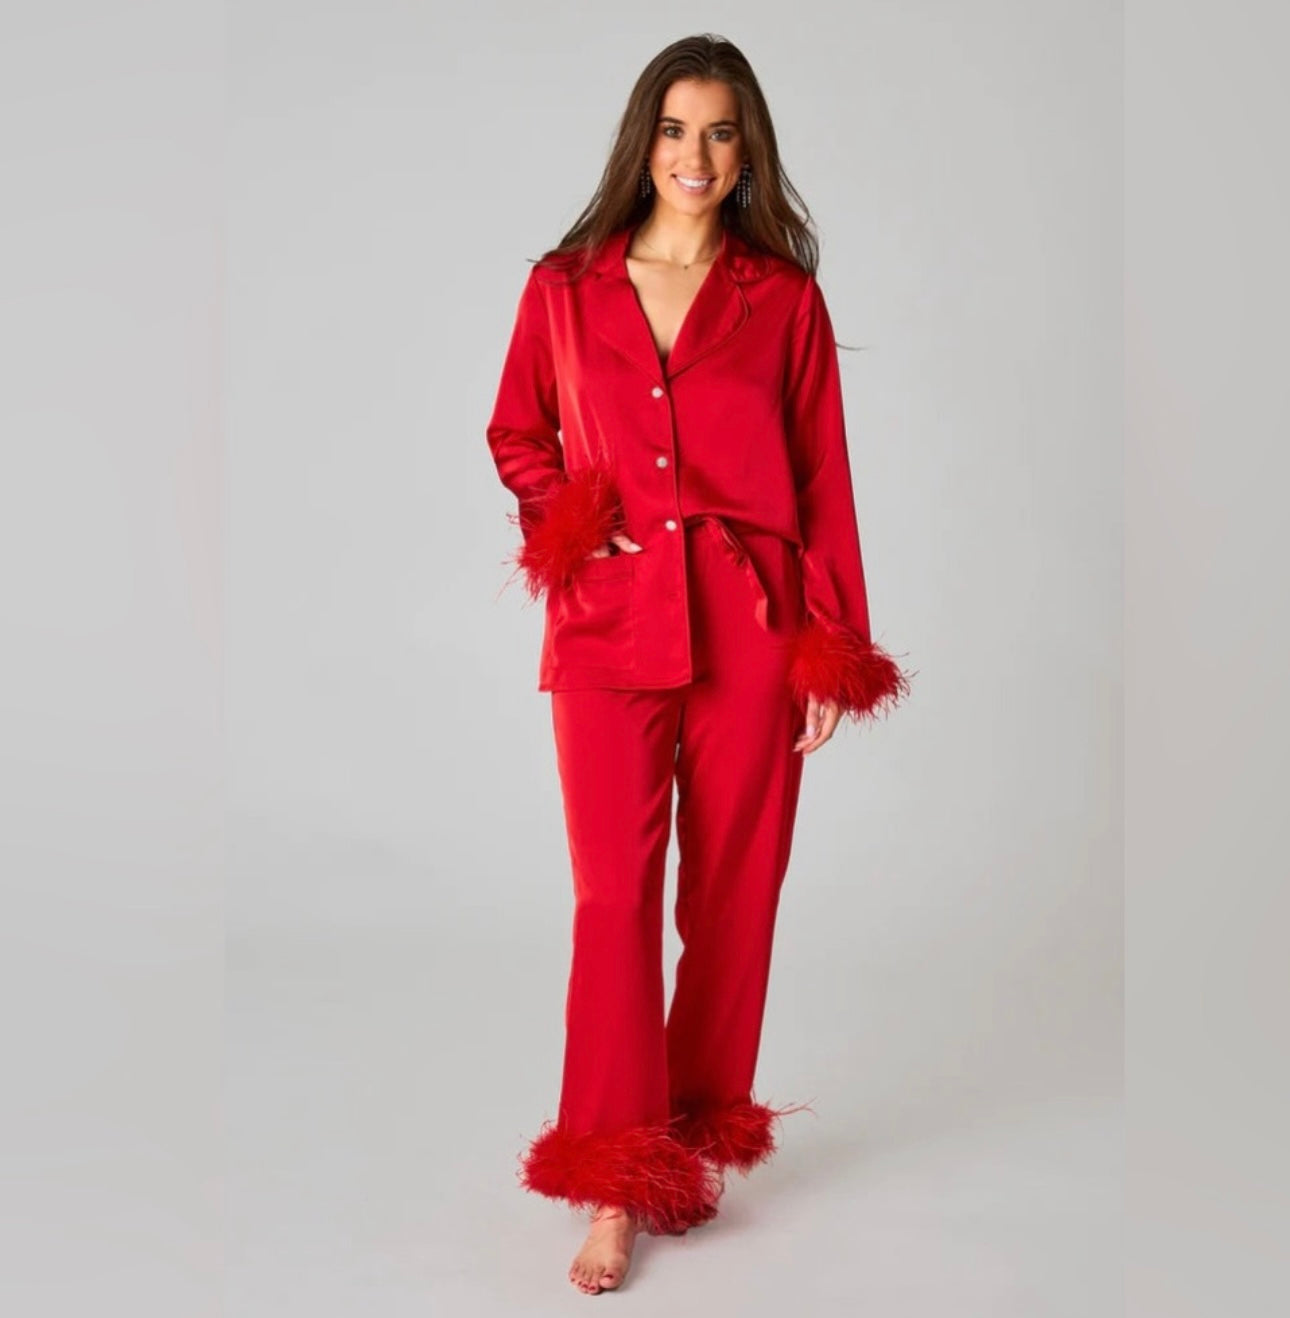 Buddy Love Red Feathers PJ Set